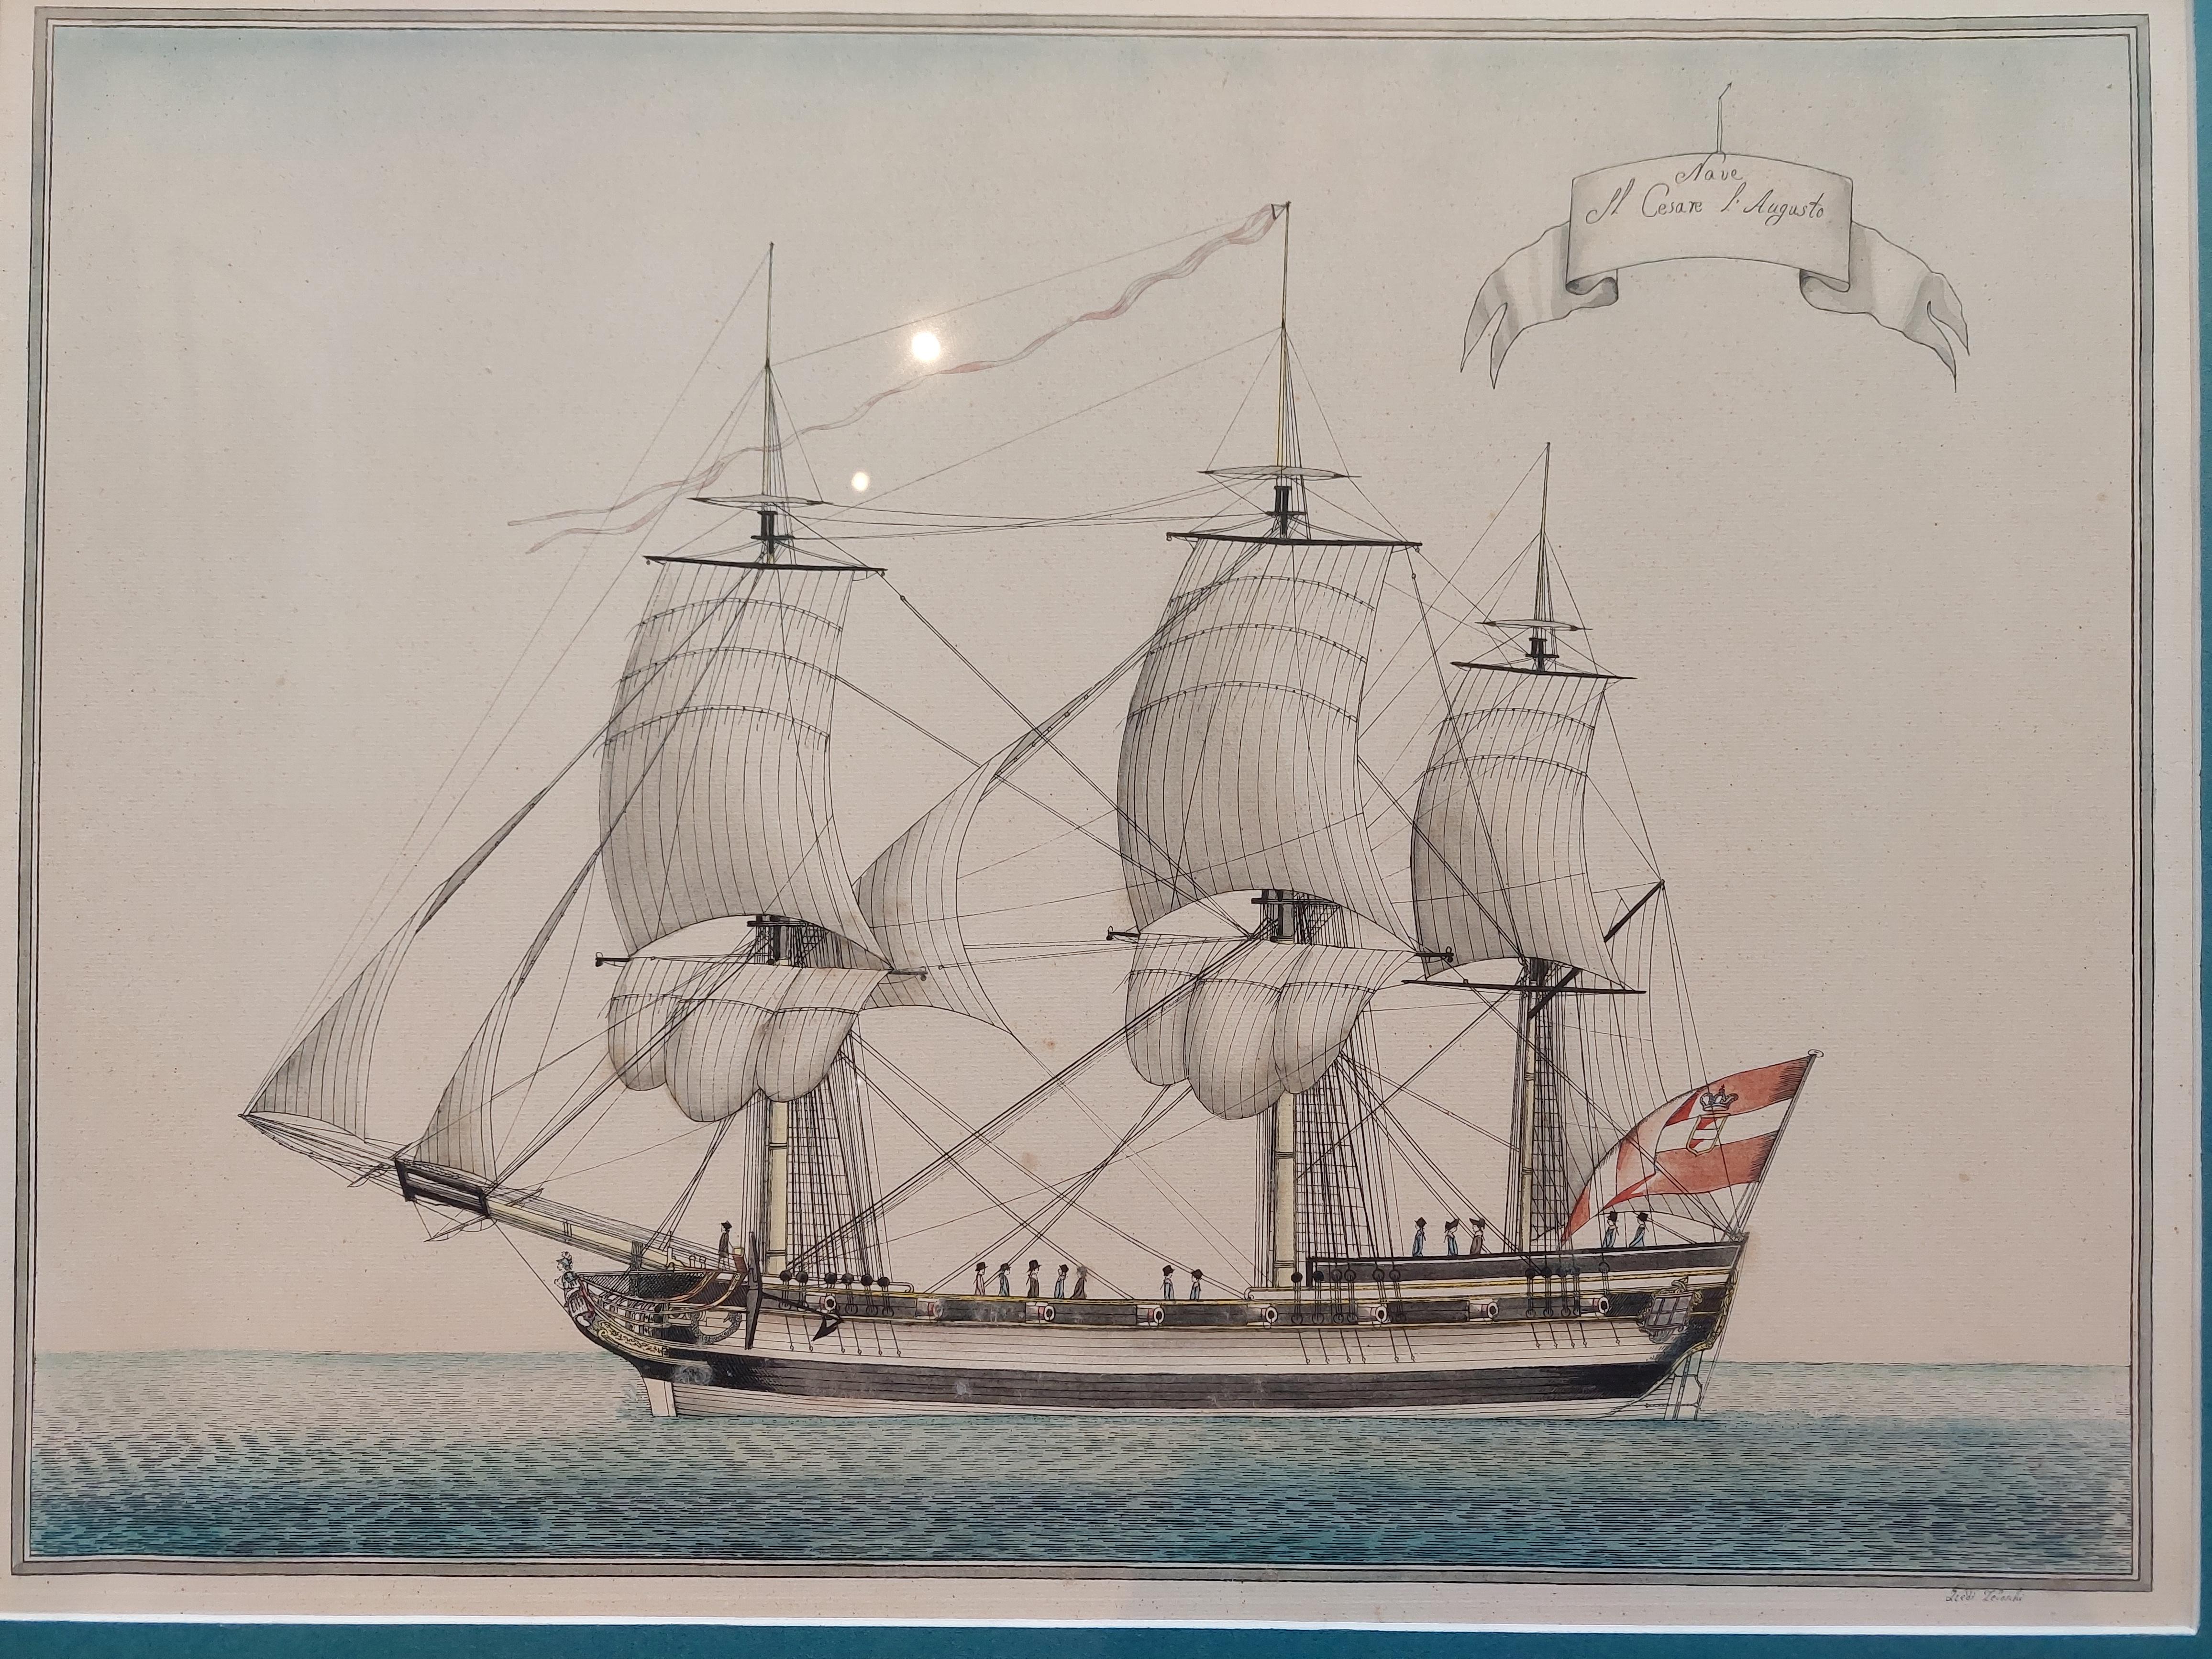 Antique print titled Nave il Cesare l'Augusto'. Etching with hand coloring, published circa 1850. Signed Leveschi (?).